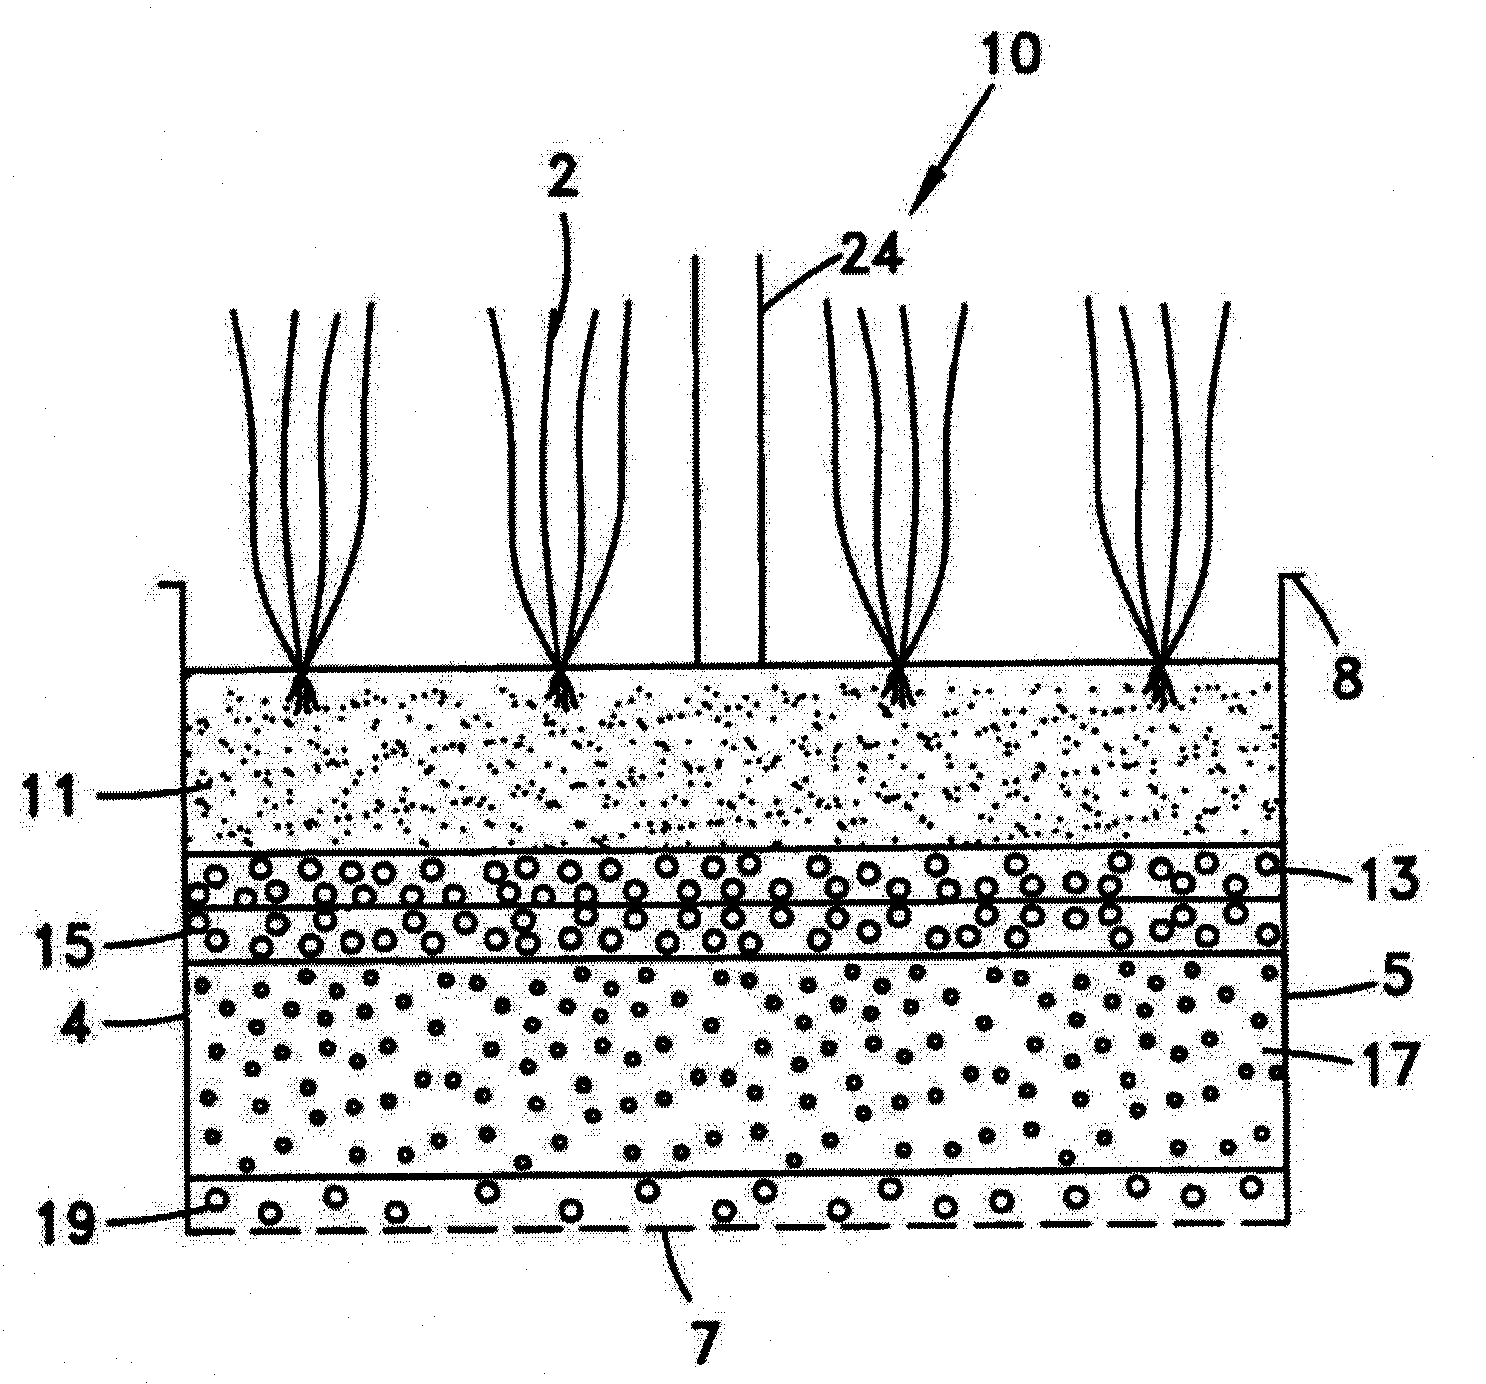 System and method for processing and reusing graywater including for use in home and garden